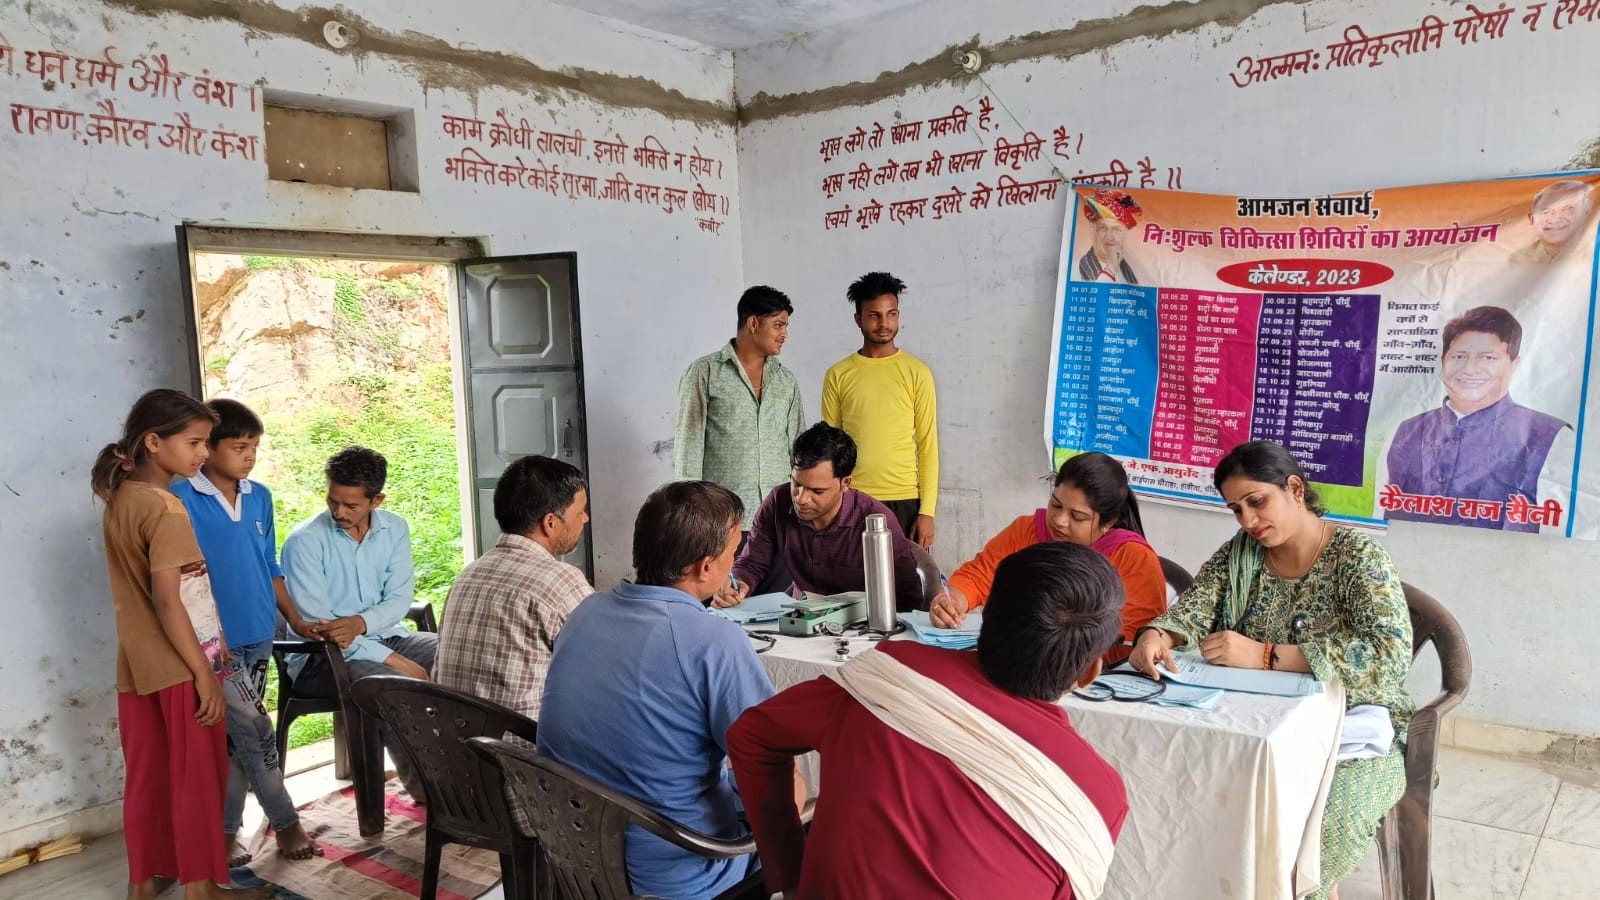 WEEKLY FREE MEDICAL CAMP ORGANIZED AT VILLAGE BILONCHI ON DATED 28 JUNE 2023 PER SCHEDULE